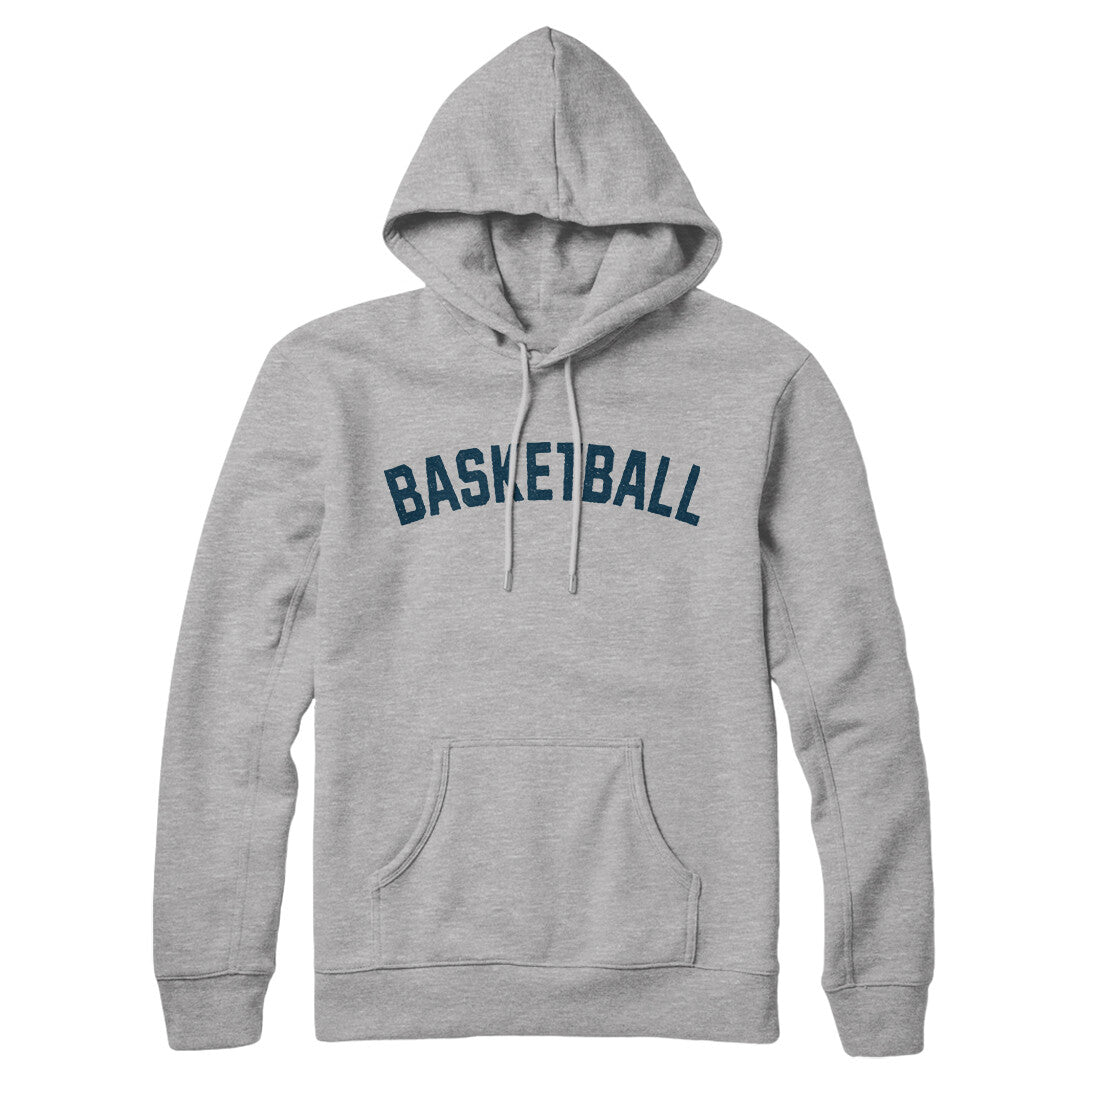 Basketball in Heather Grey Color